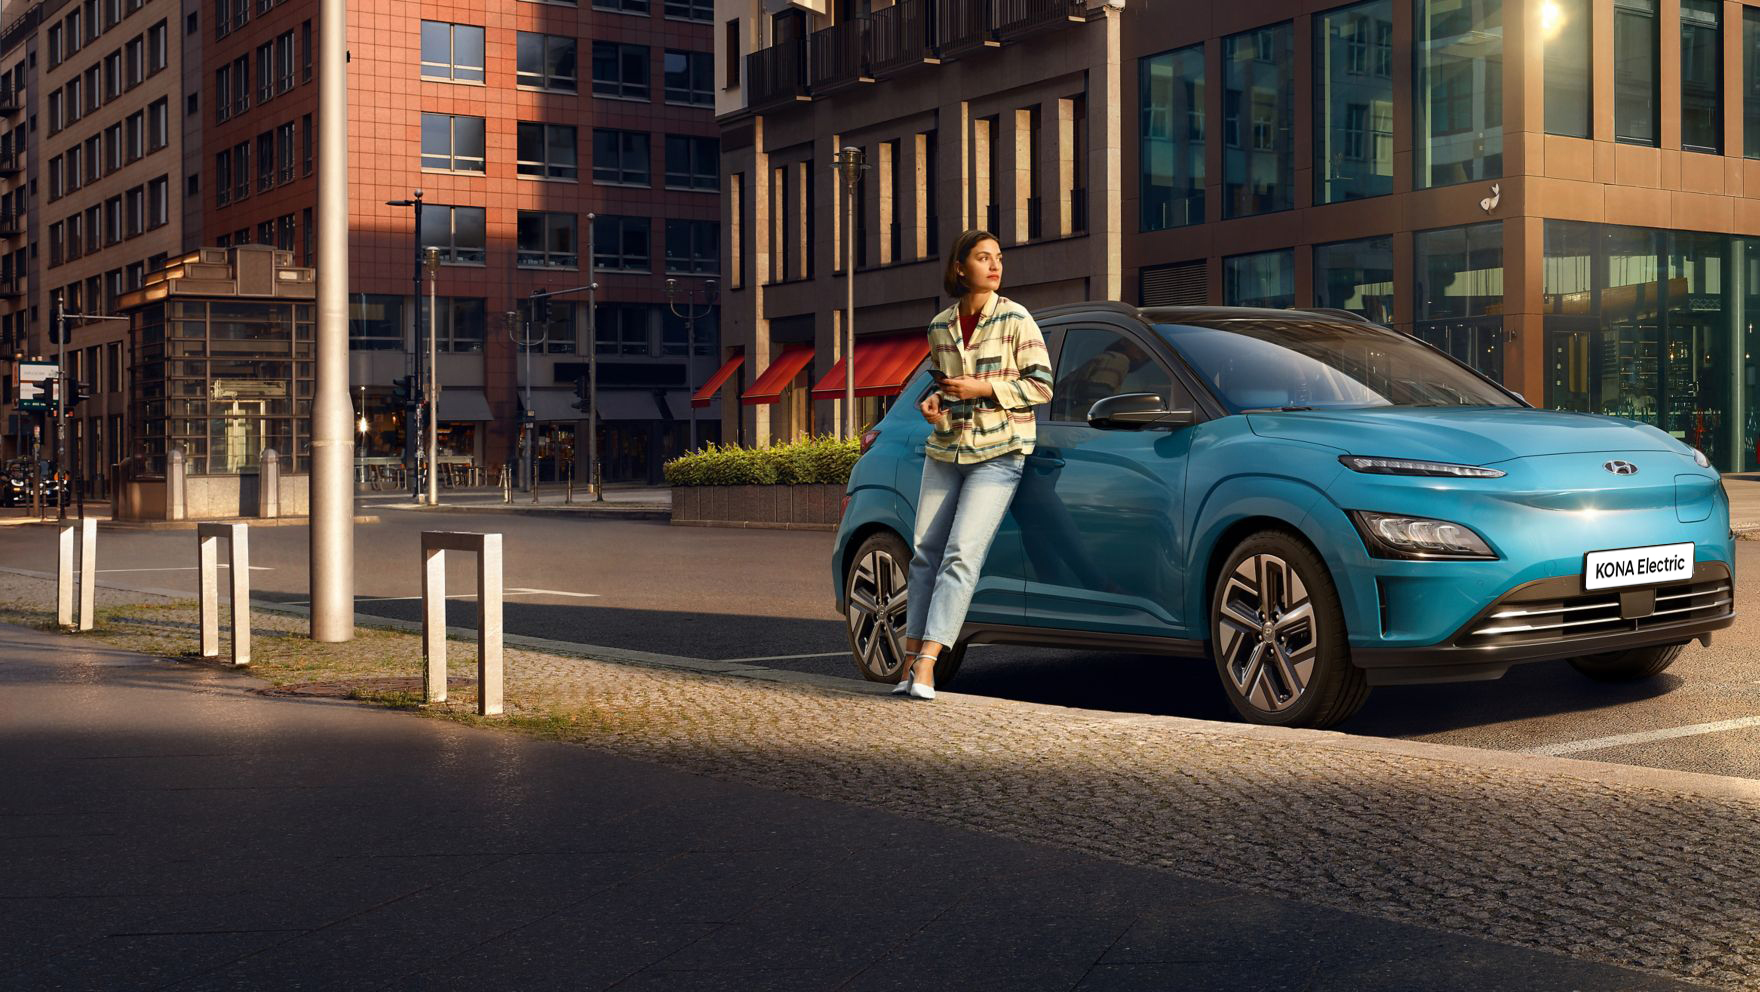 A woman leaning relaxed against the new Hyundai Kona Electric in a city.